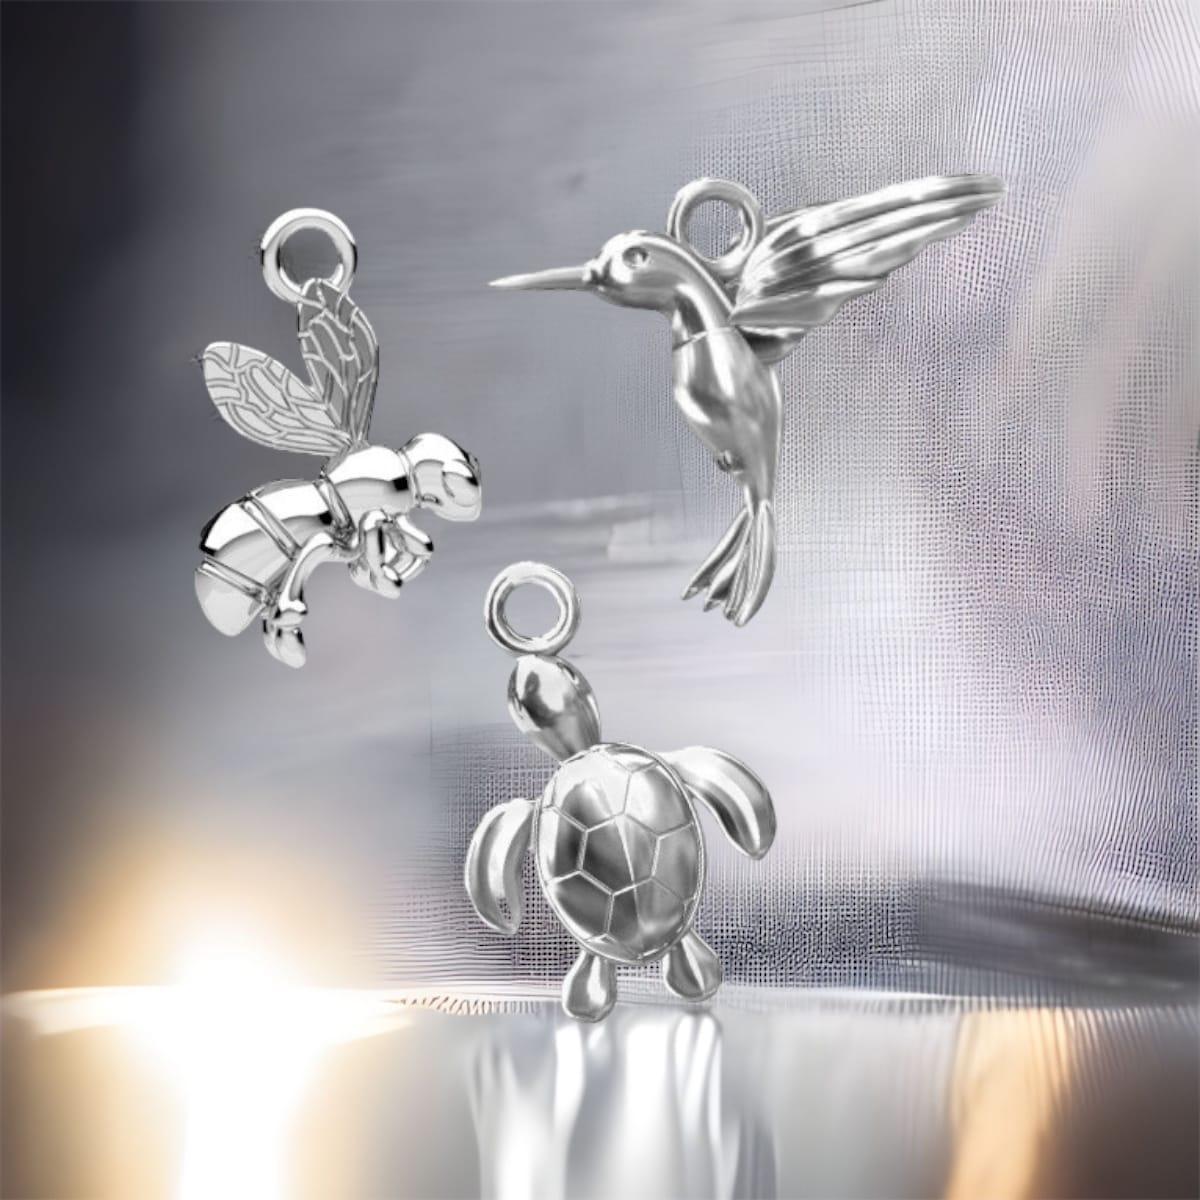 Wholesale Wholesale 925 sterling silver charms for bracelets high quality  dangle charms From m.